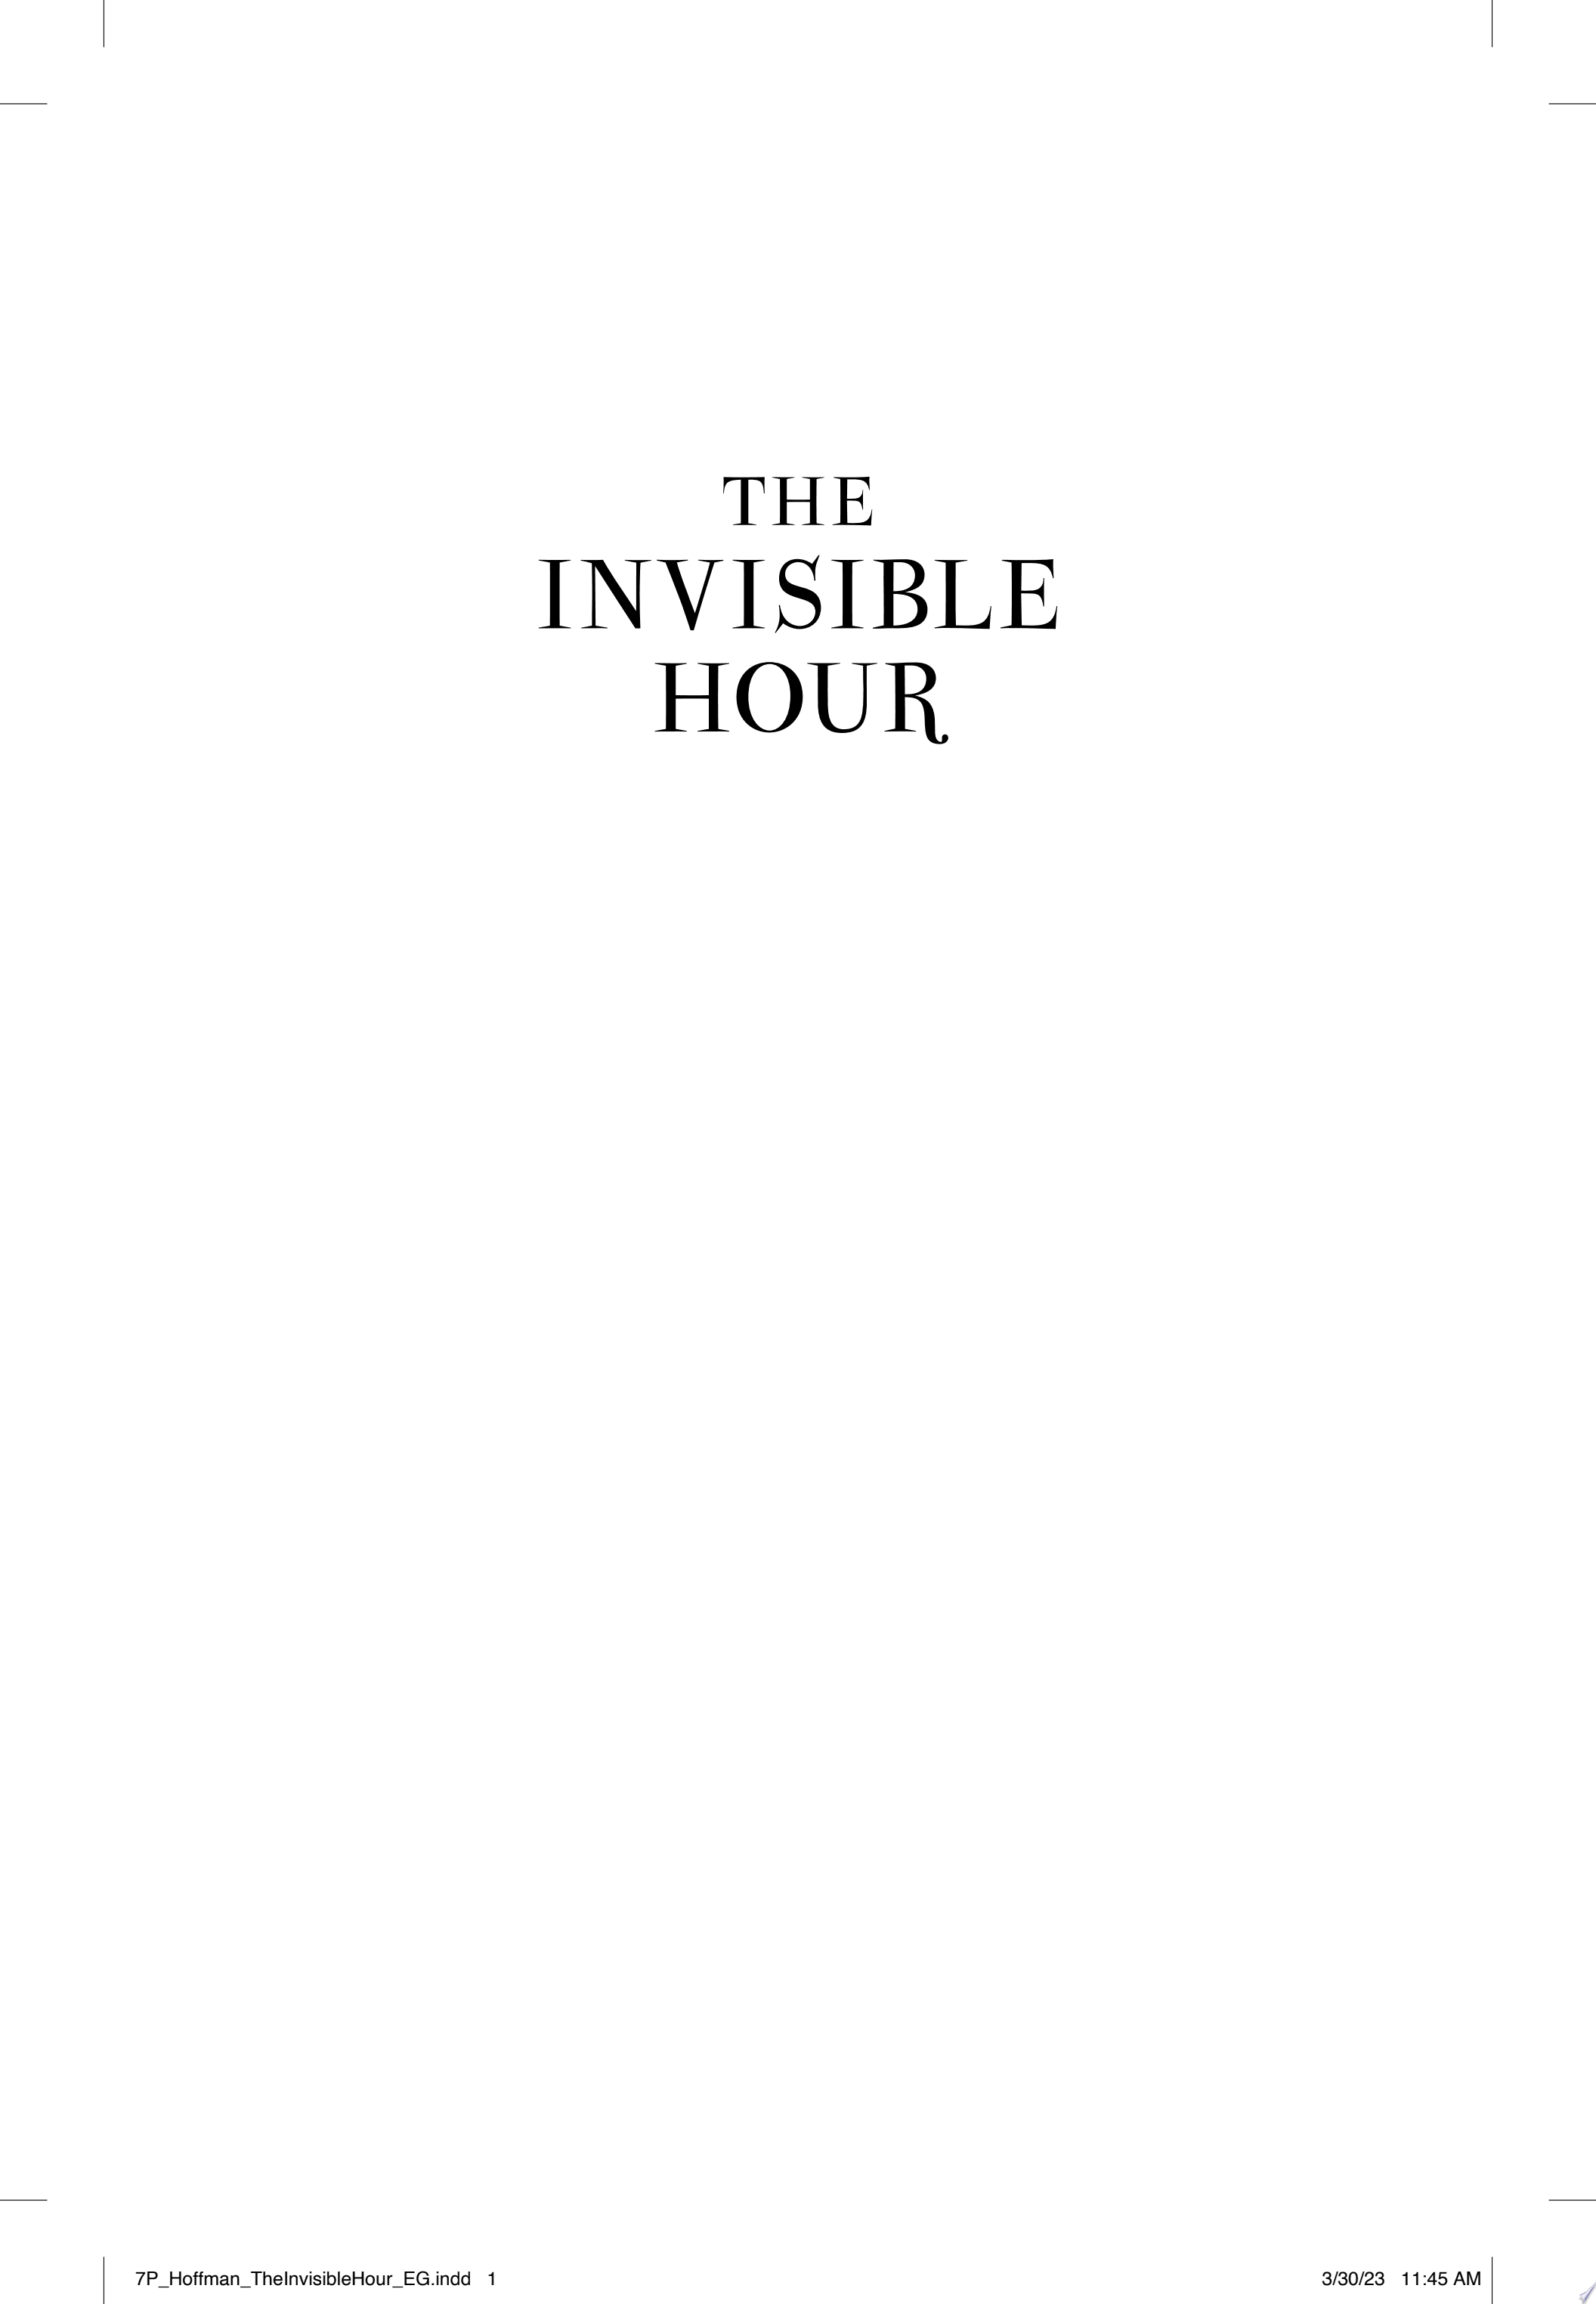 Image for "The Invisible Hour"